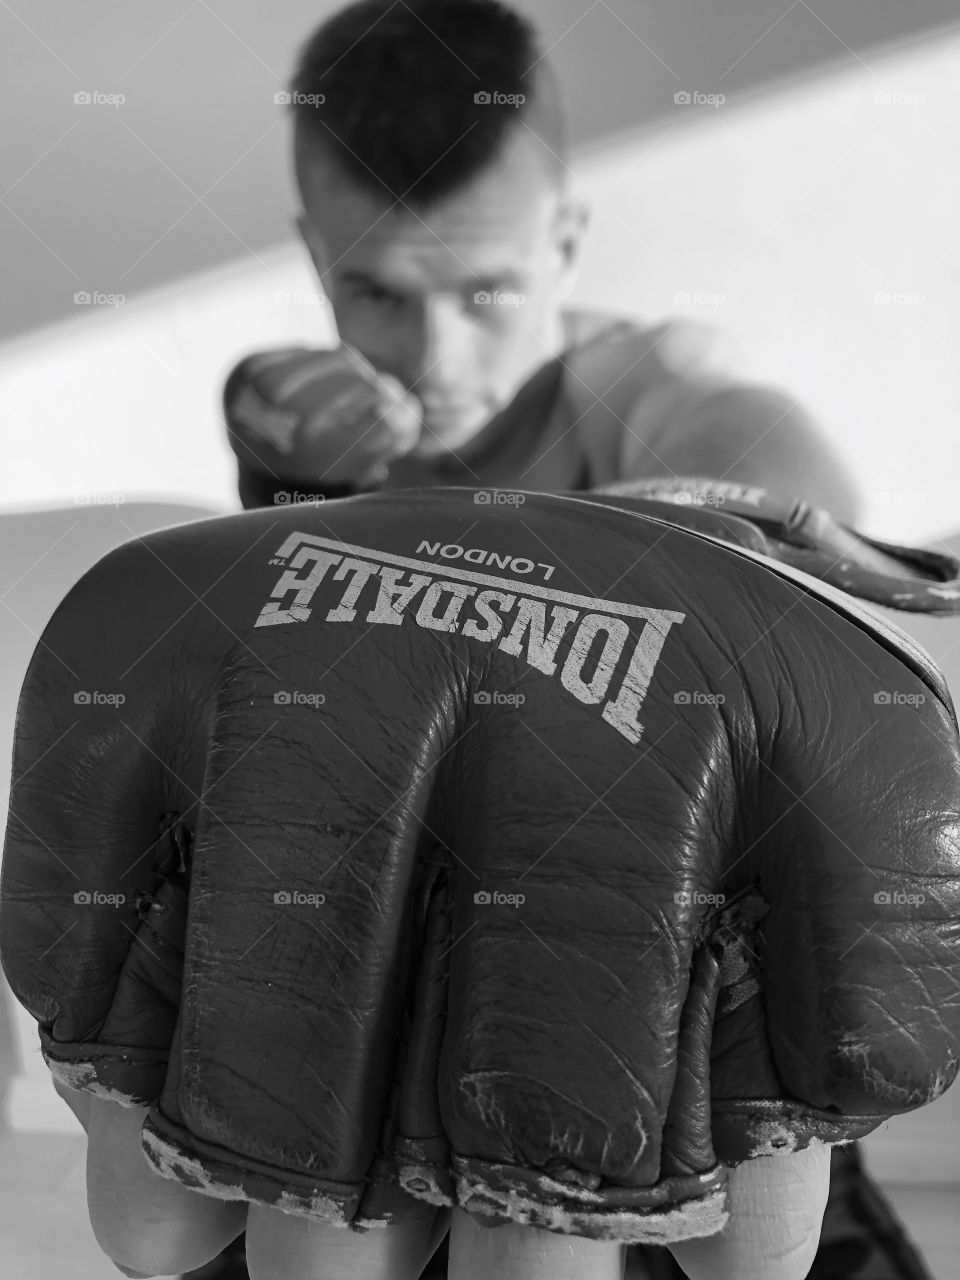 Boxing is good for your health, condition, mind and physique. Black and white picture with a boxer in the background. 